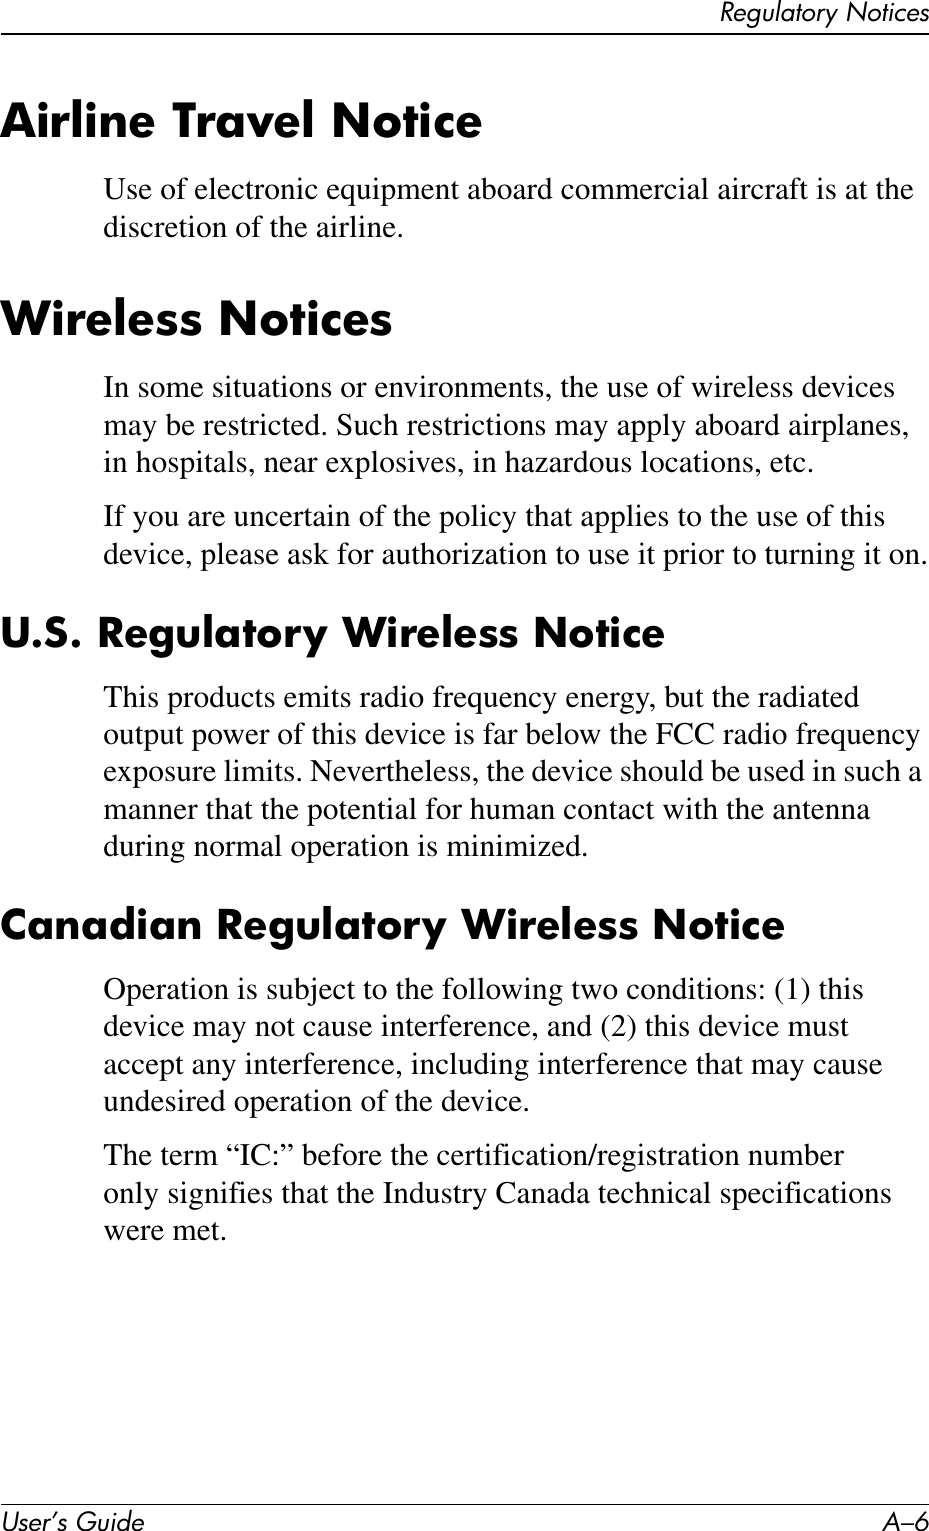 User’s Guide A–6Regulatory NoticesAirline Travel NoticeUse of electronic equipment aboard commercial aircraft is at the discretion of the airline.Wireless NoticesIn some situations or environments, the use of wireless devices may be restricted. Such restrictions may apply aboard airplanes, in hospitals, near explosives, in hazardous locations, etc.If you are uncertain of the policy that applies to the use of this device, please ask for authorization to use it prior to turning it on.U.S. Regulatory Wireless NoticeThis products emits radio frequency energy, but the radiated output power of this device is far below the FCC radio frequency exposure limits. Nevertheless, the device should be used in such a manner that the potential for human contact with the antenna during normal operation is minimized.Canadian Regulatory Wireless NoticeOperation is subject to the following two conditions: (1) this device may not cause interference, and (2) this device must accept any interference, including interference that may cause undesired operation of the device.The term “IC:” before the certification/registration number only signifies that the Industry Canada technical specifications were met.